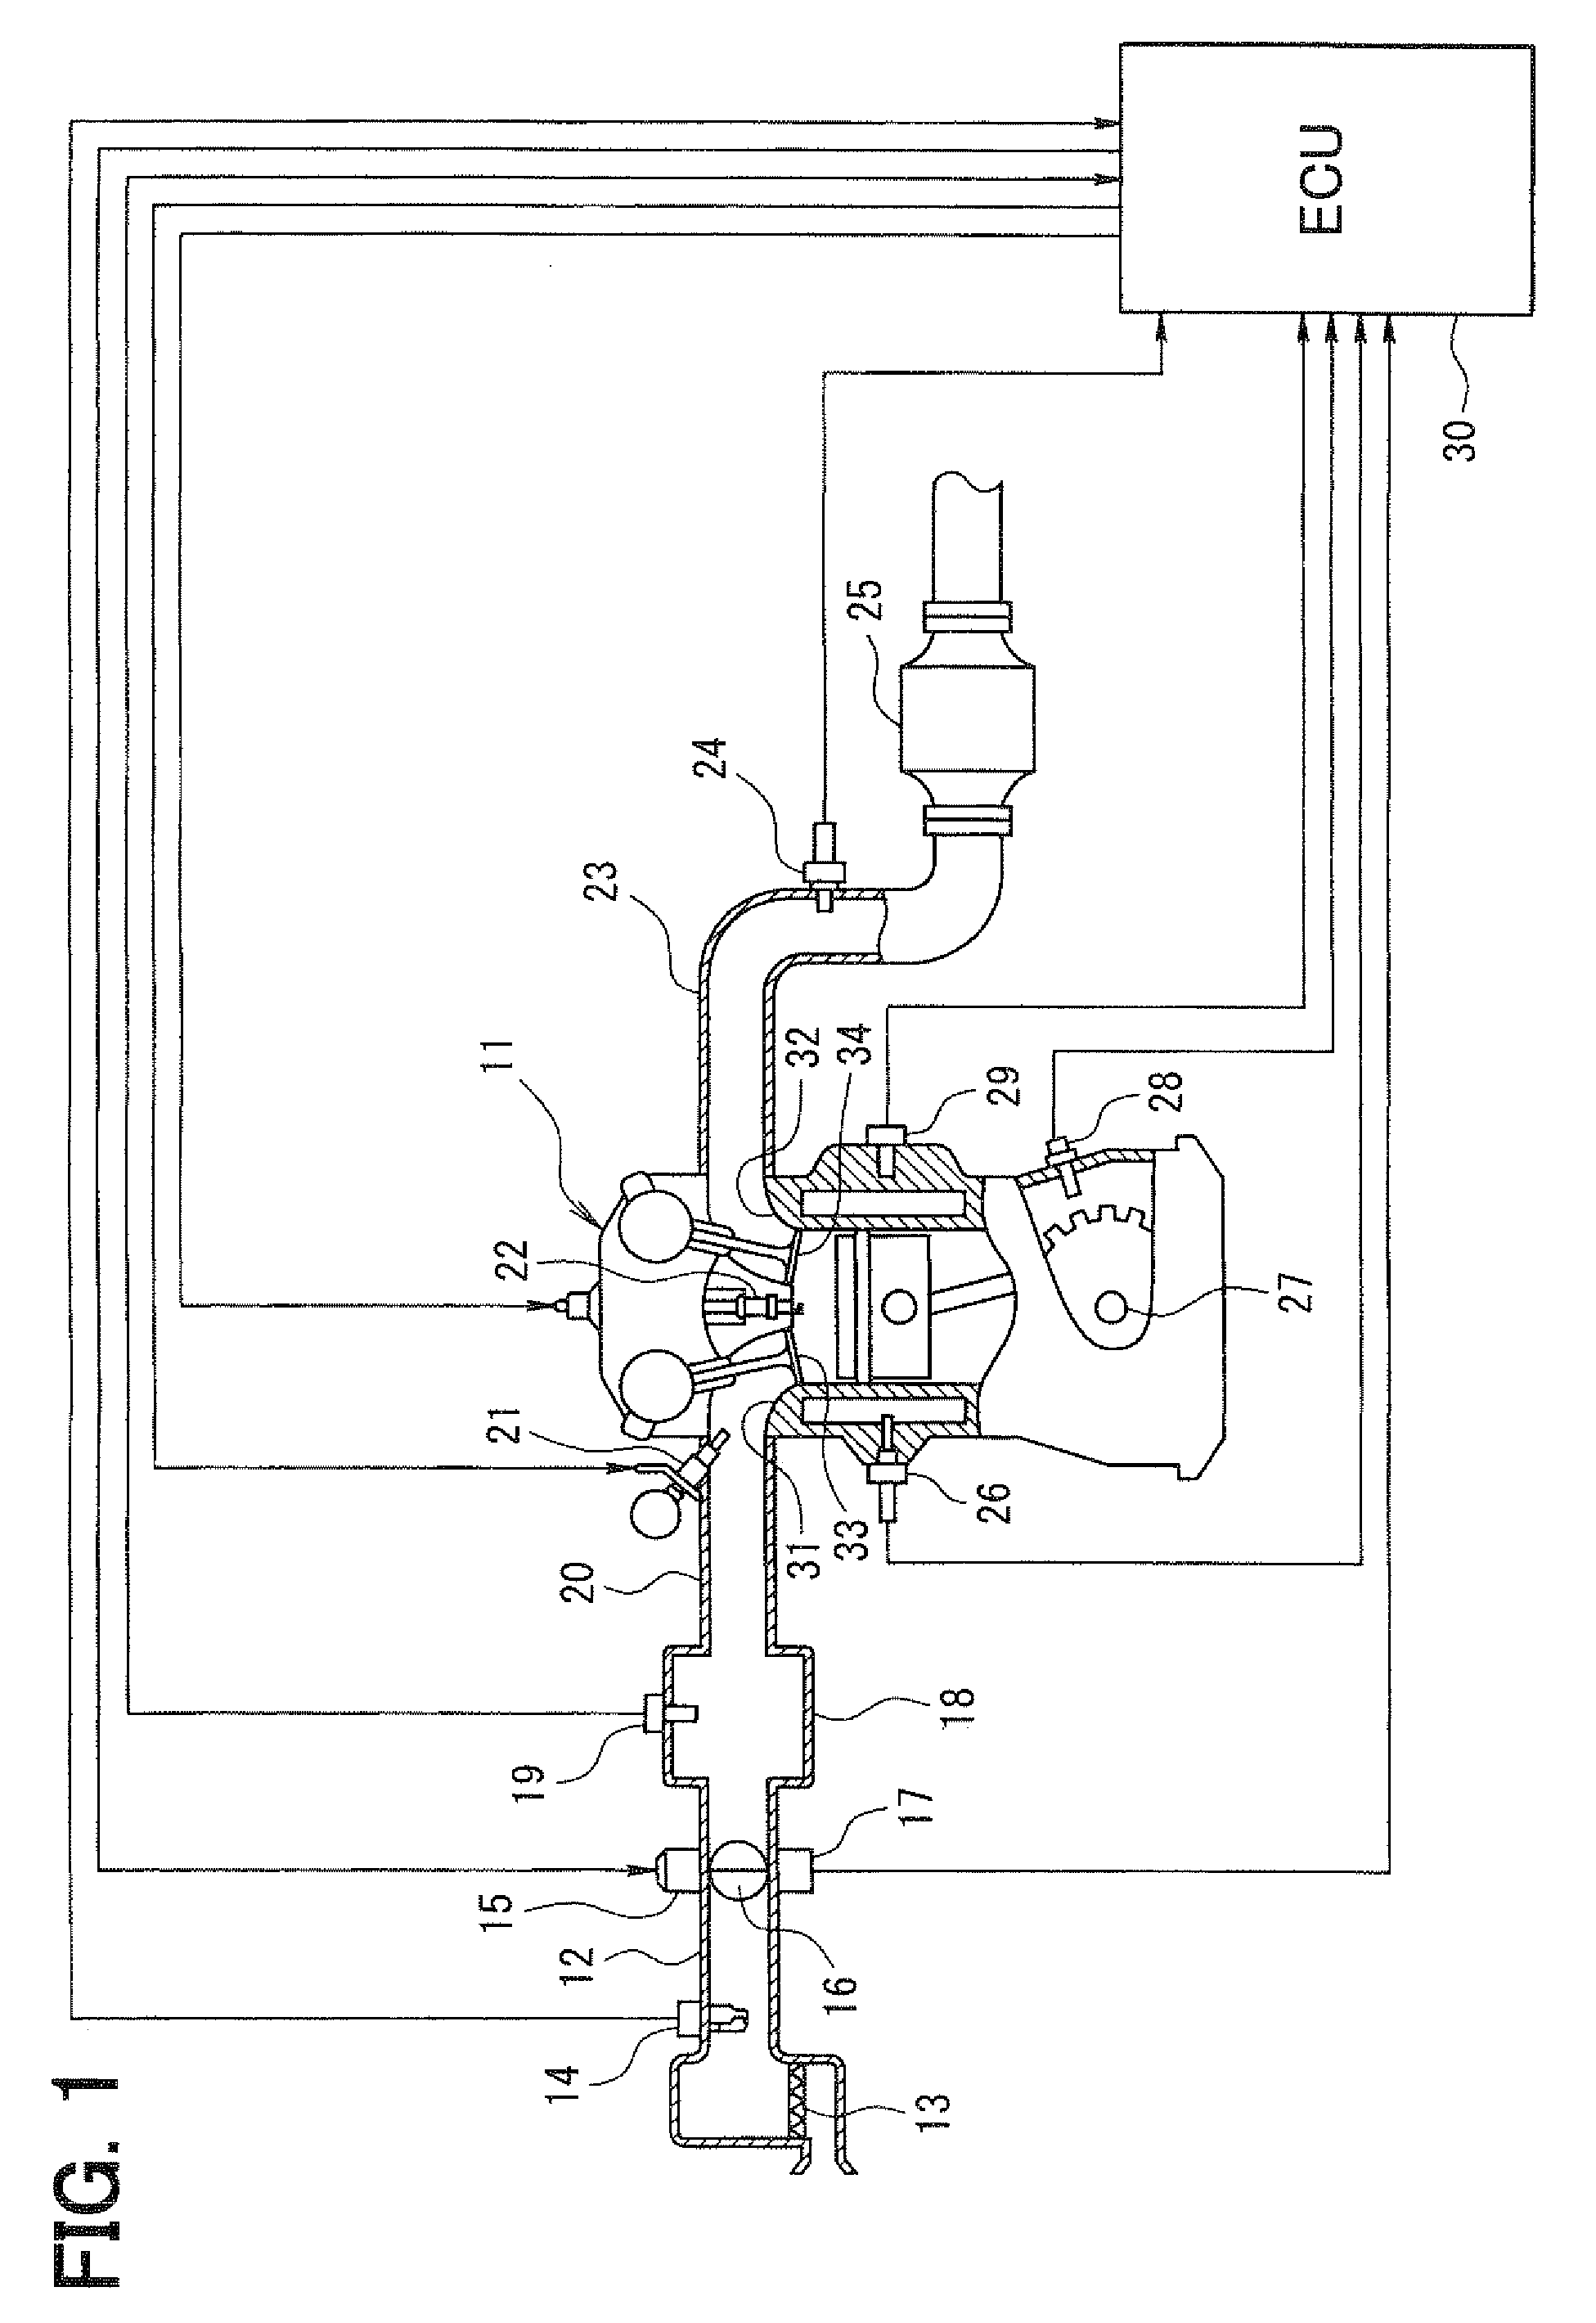 Abnormality diagnosis device of internal combustion engine